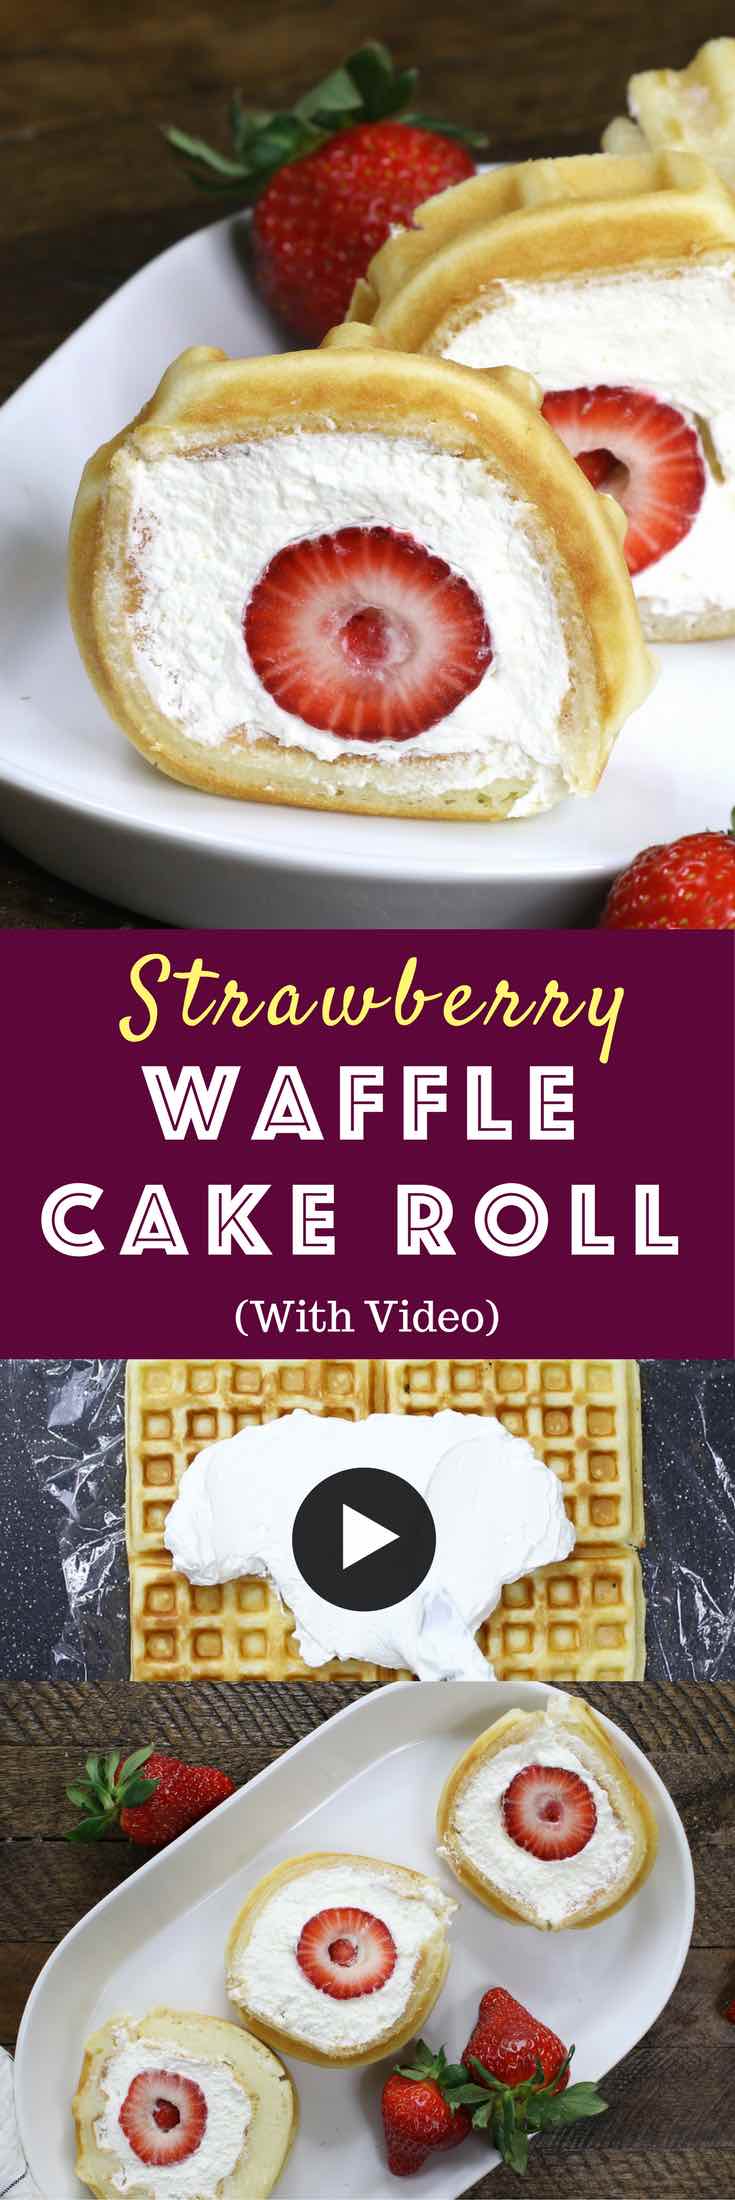 Strawberry Waffle Cake Roll - a quick and easy breakfast, snack or dessert made with waffle mix or frozen waffle, fresh strawberries, and whipped cream. Soft waffle topped with whipped cream, and strawberries. It melts in your mouth! So good and so beautiful! No bake dessert, vegetarian! | tipbuzz.com